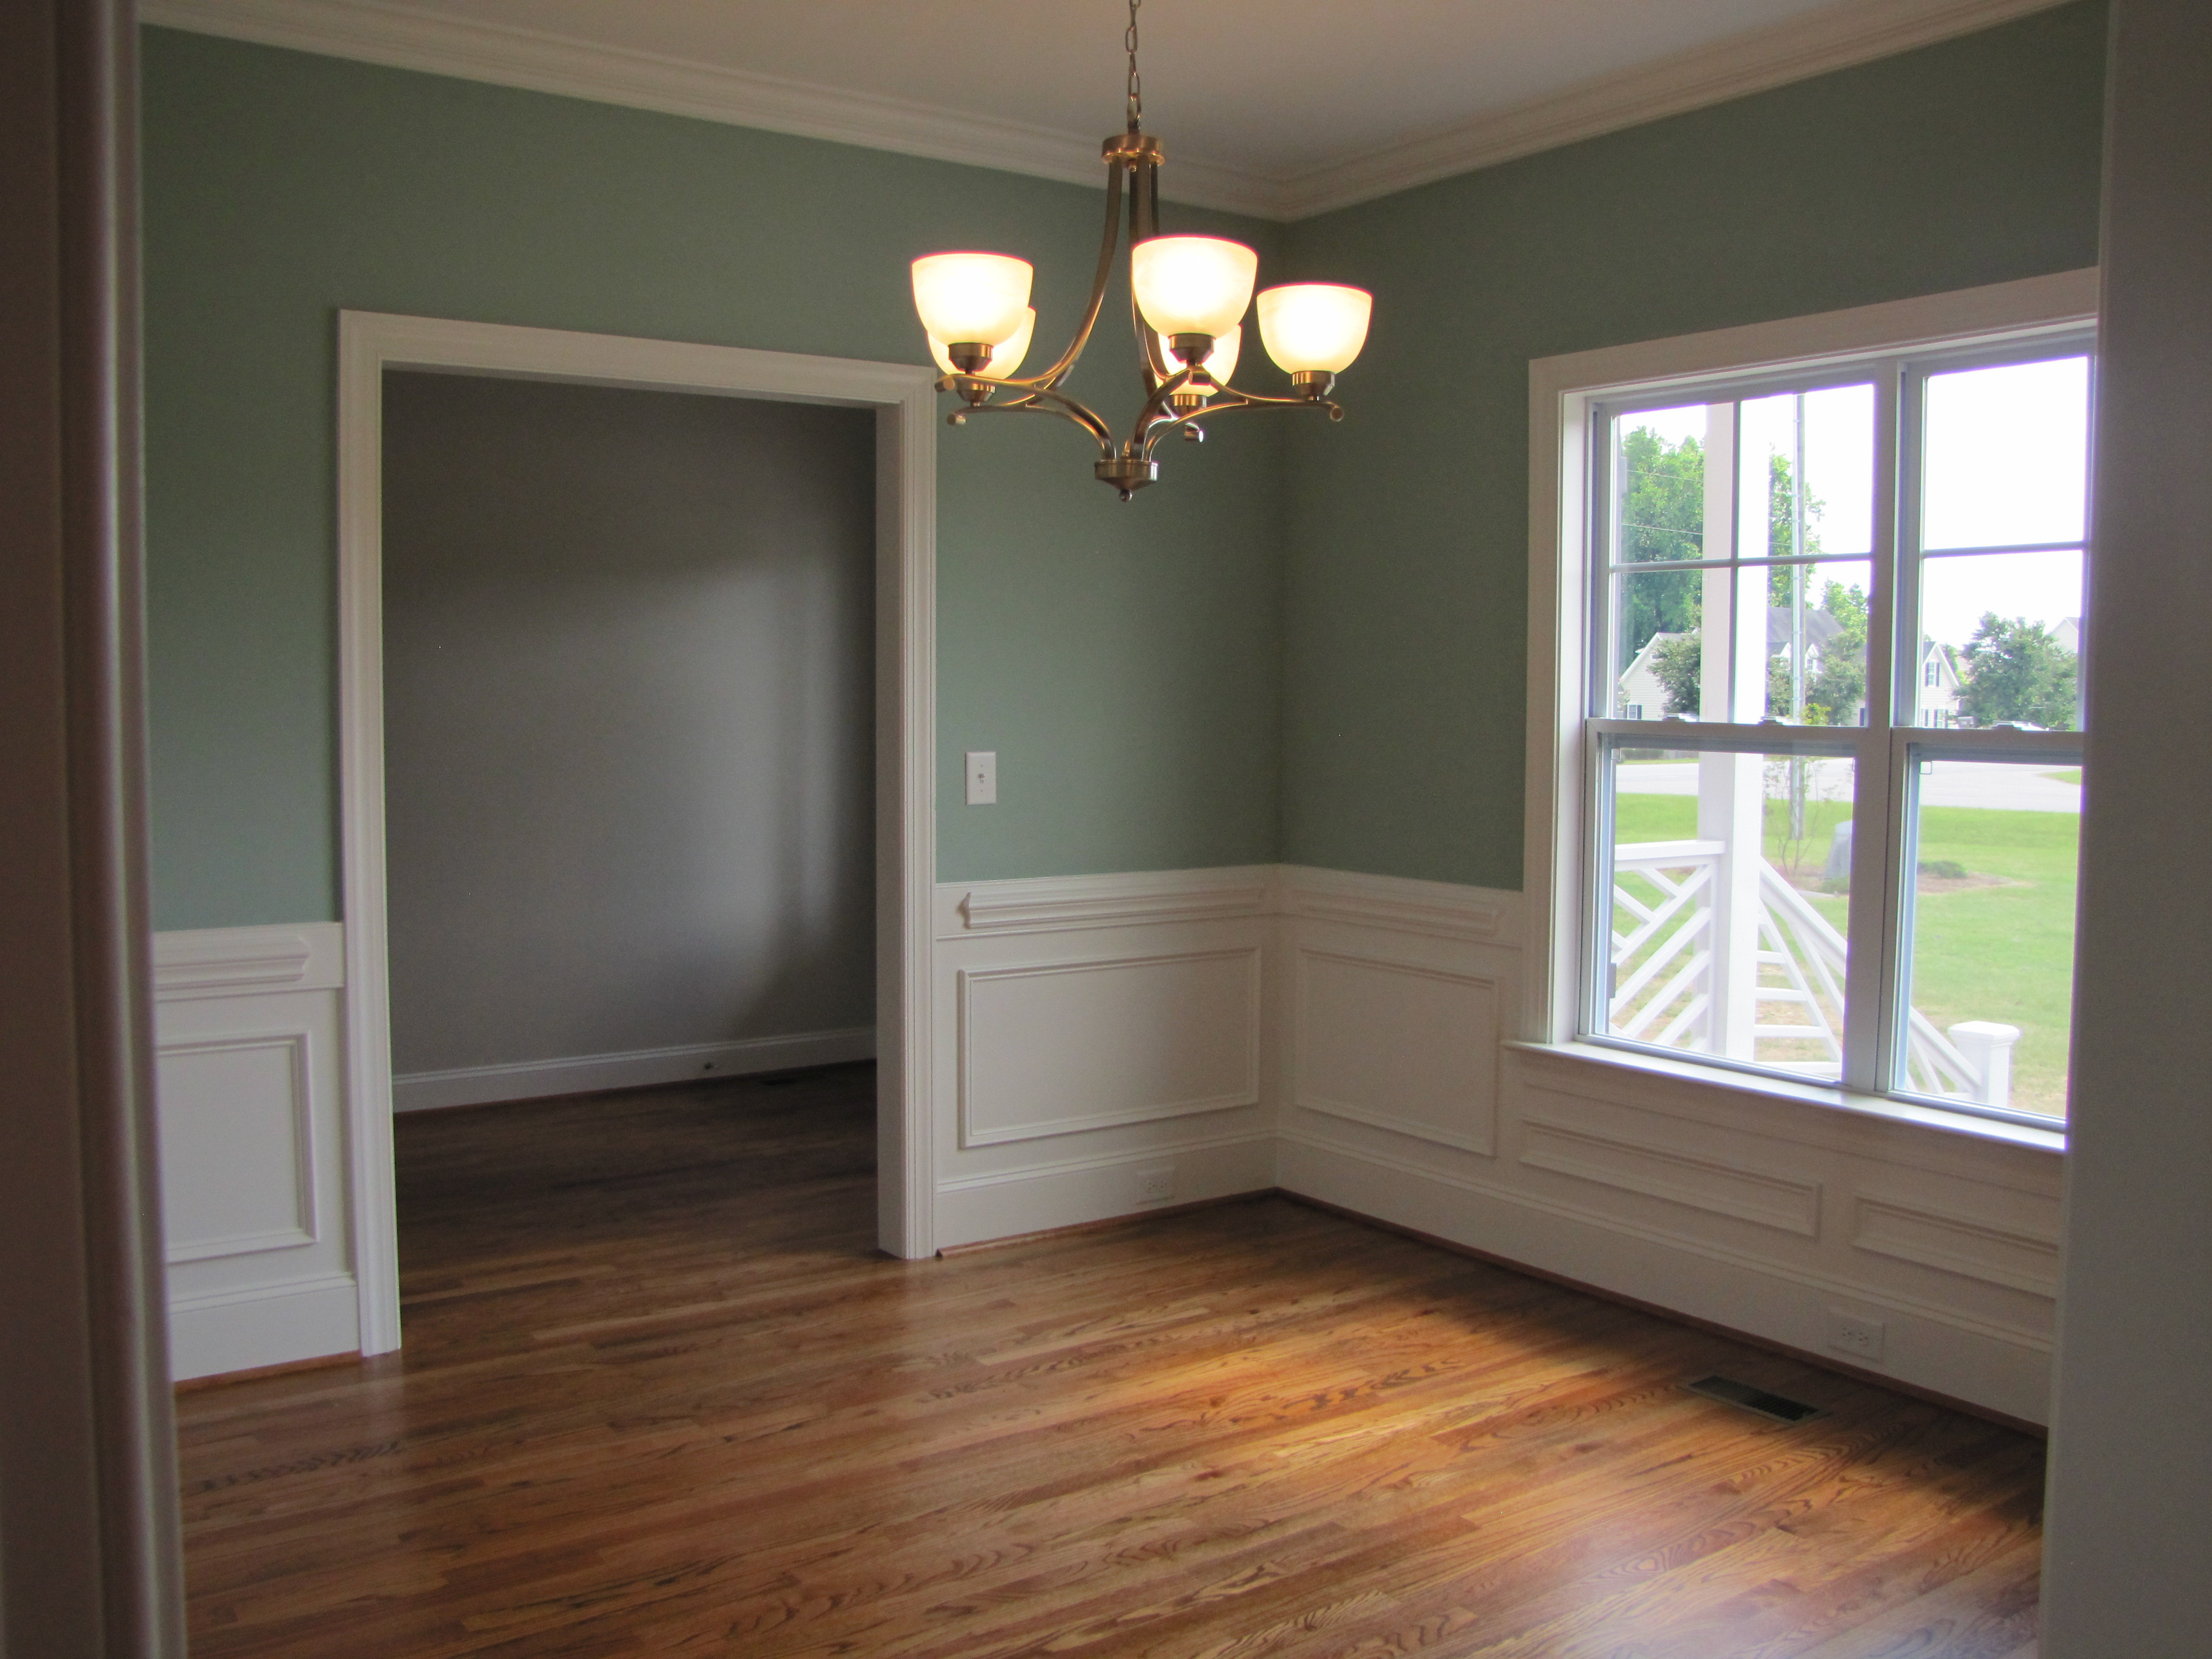 25 Fashionable Hardwood Floor Repair Wilmington Nc 2024 free download hardwood floor repair wilmington nc of four seasons contractors blog four seasons contractors 252 462 for the great room focuses on the fireplace and windows looking out to the back yard and